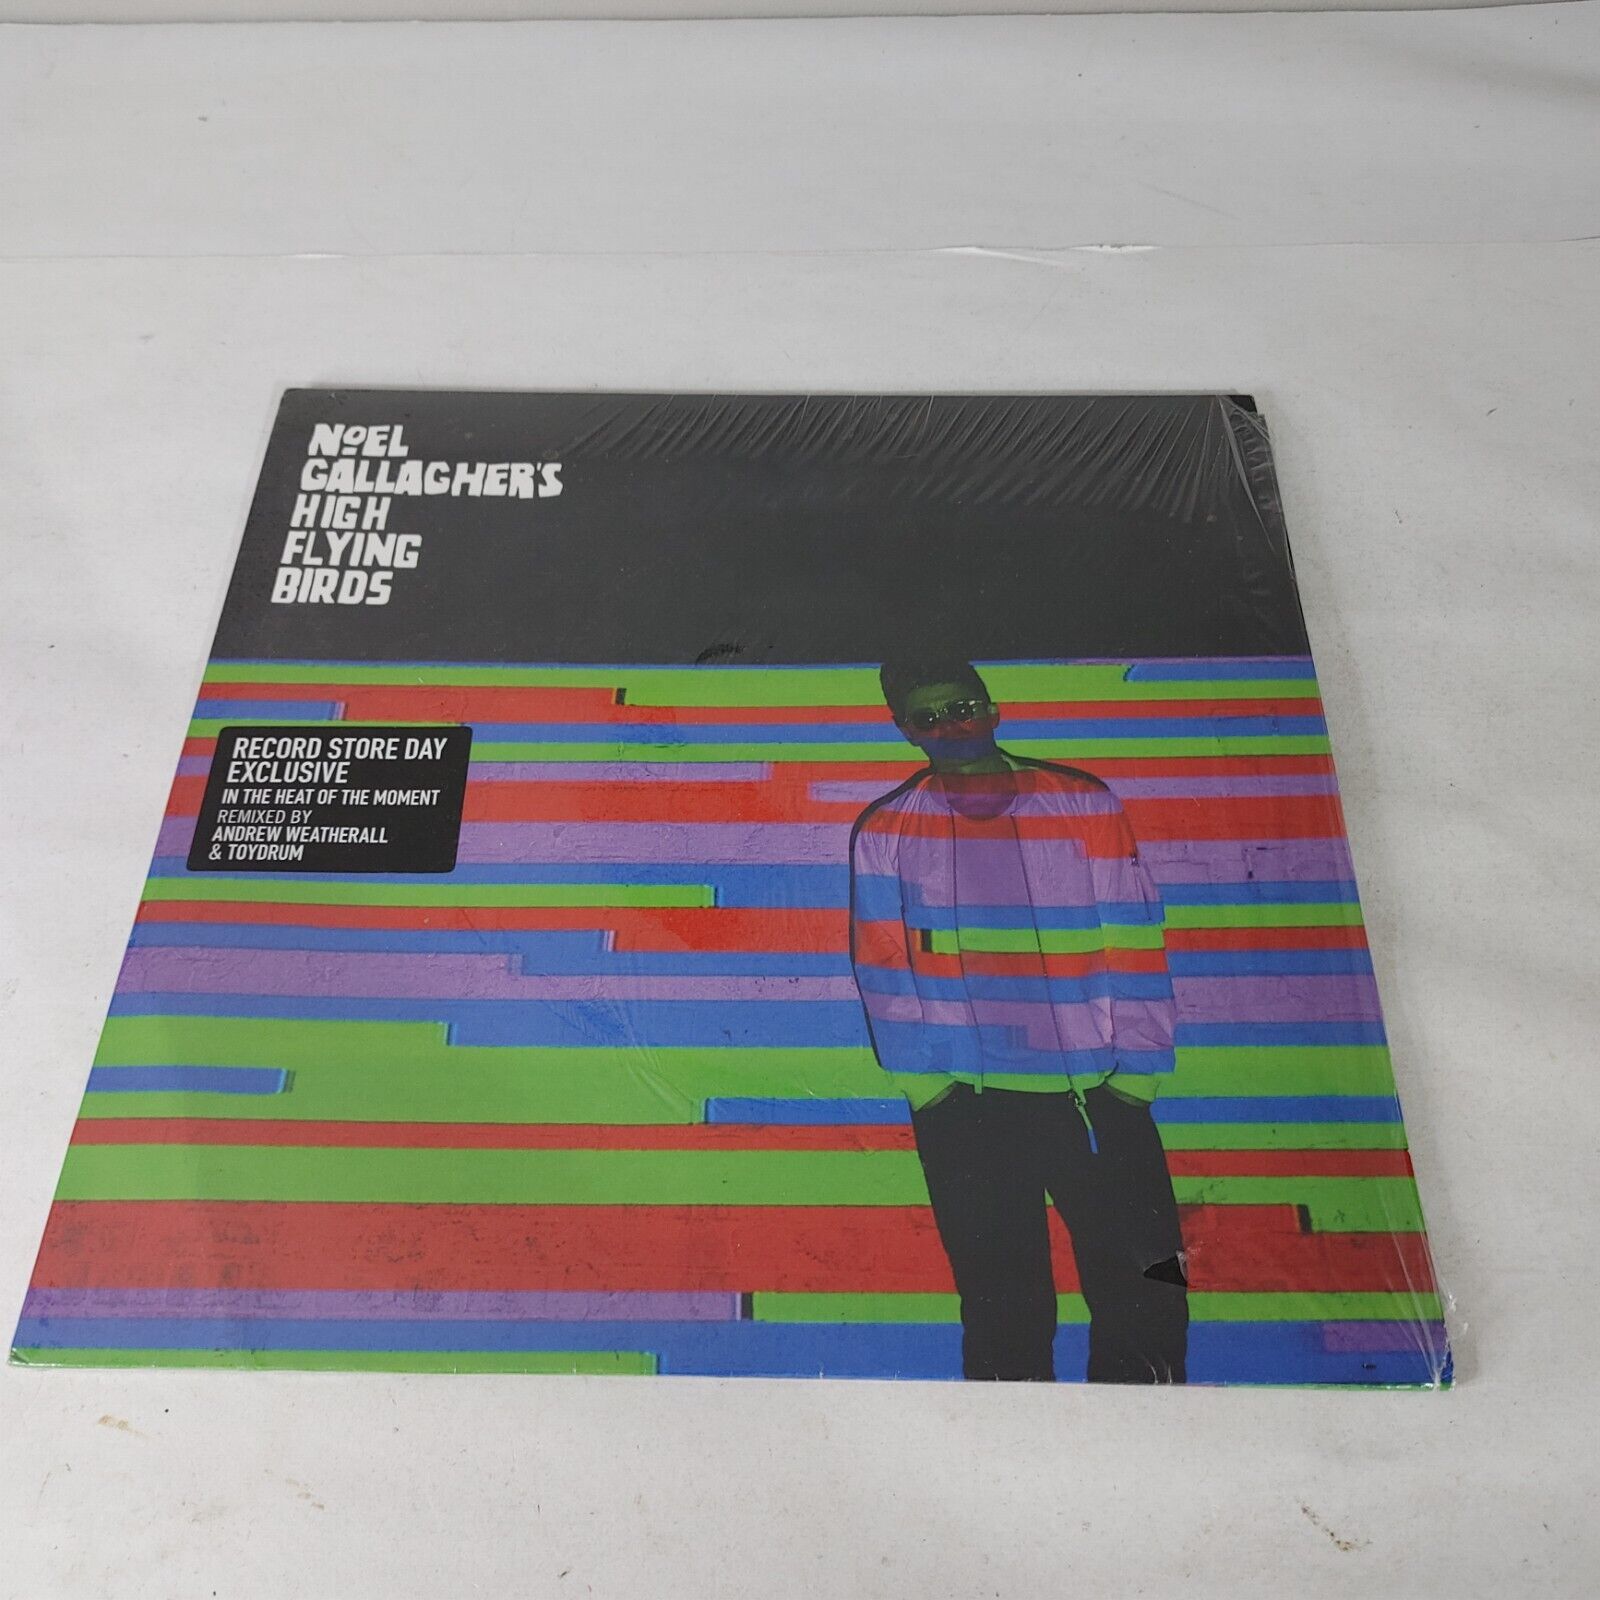 Noel Gallagher's High Flying Birds - In The Heat Of The Moment - 12" Vinyl